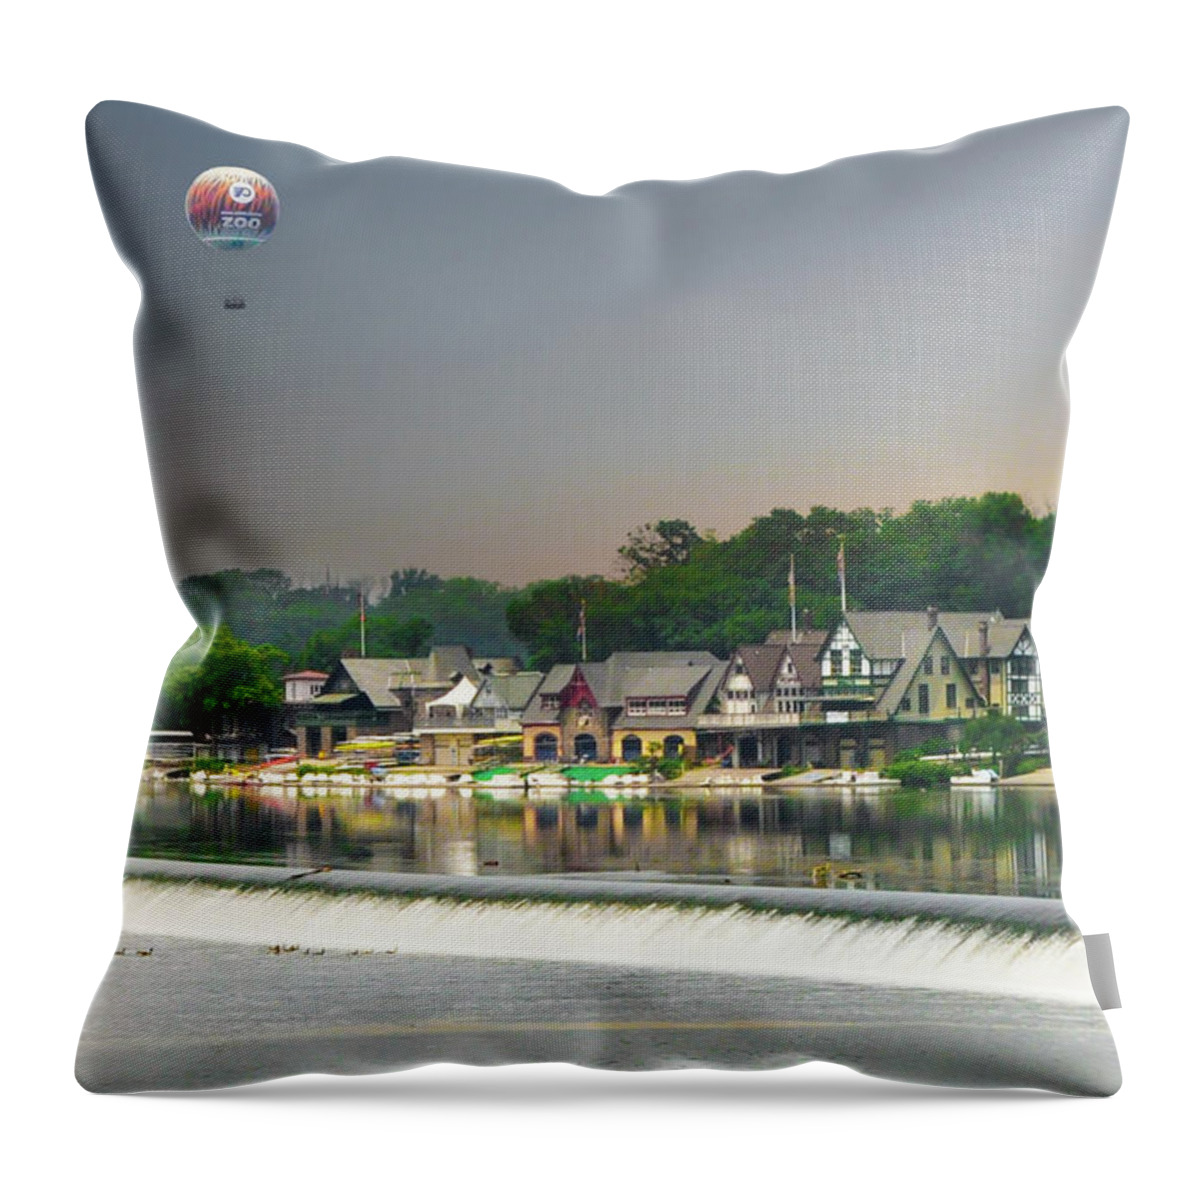 Zoo Throw Pillow featuring the photograph Zoo Balloon Flying over Boathouse Row by Bill Cannon